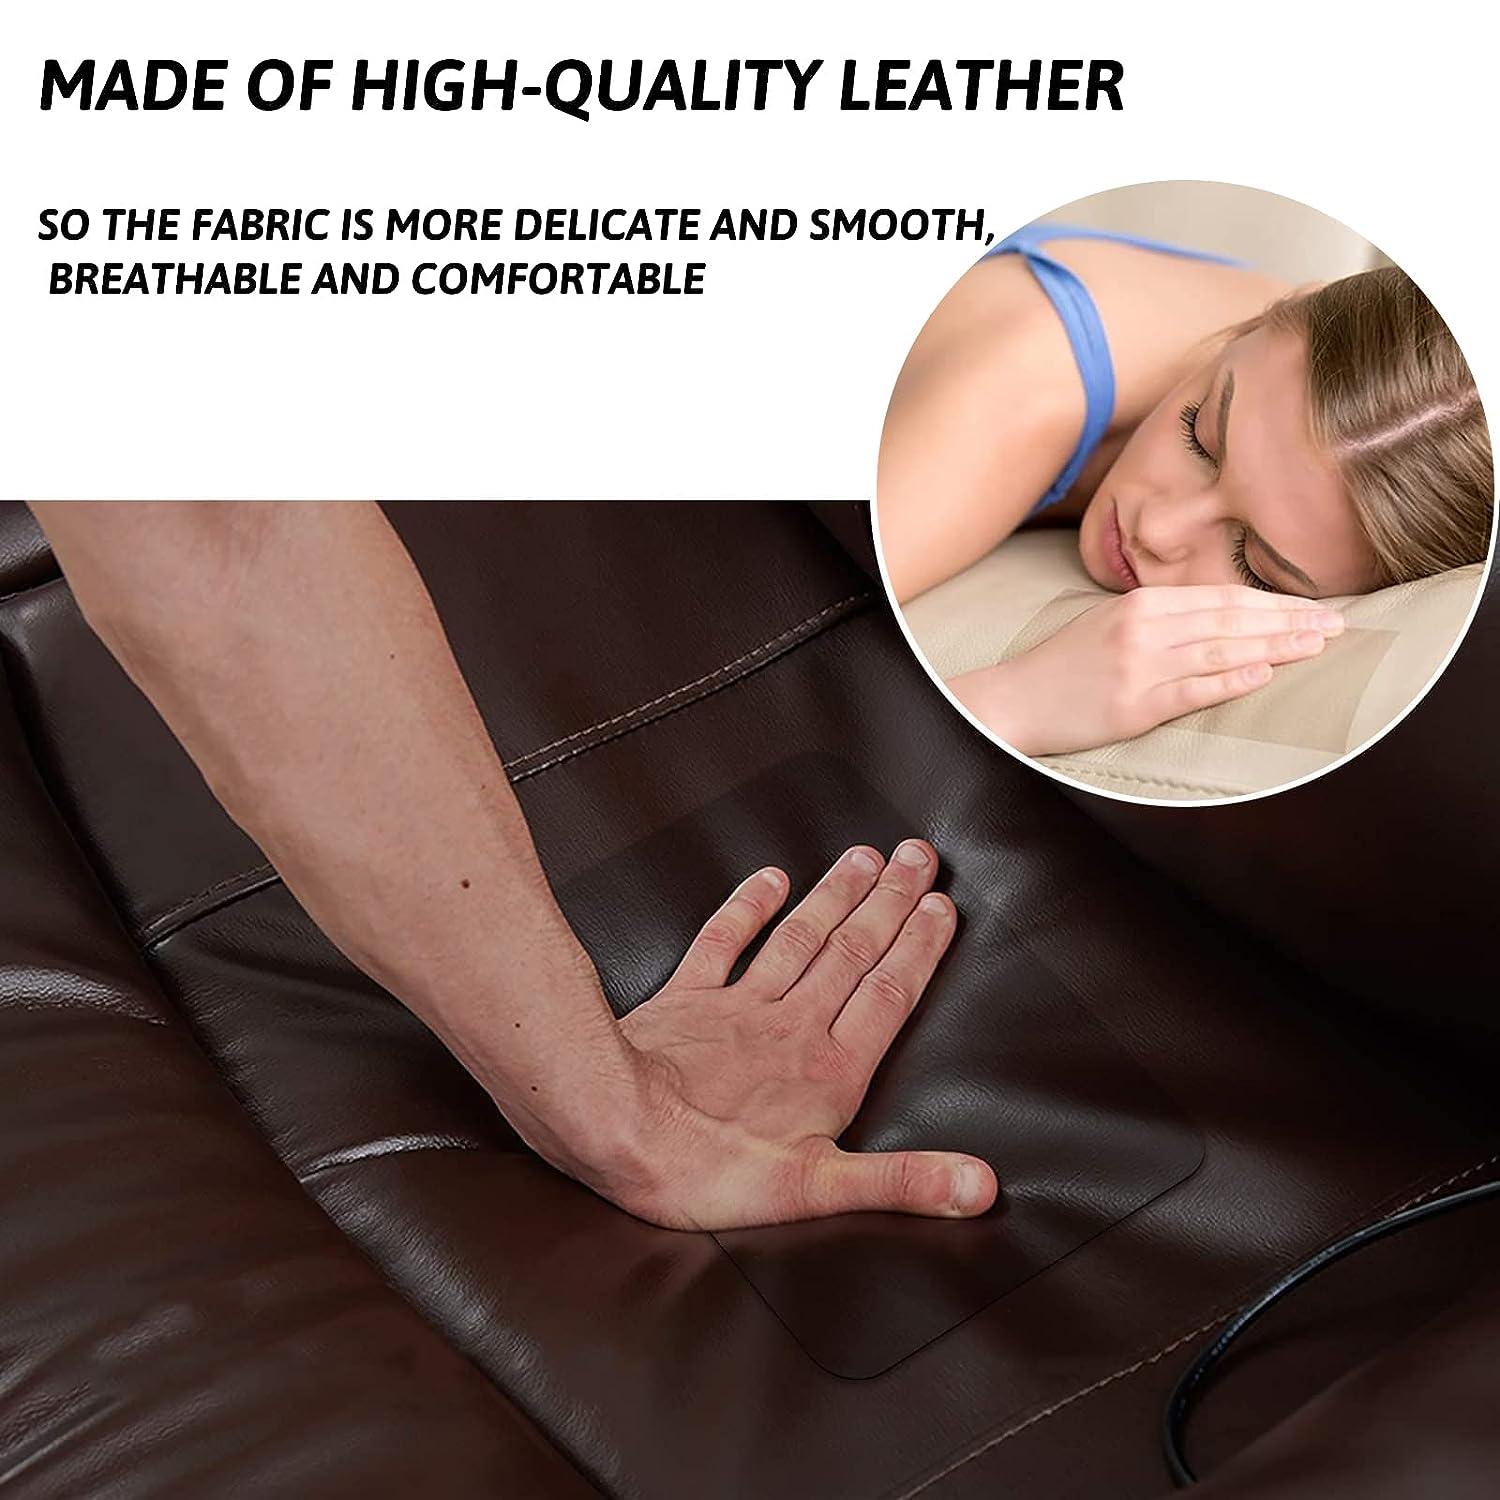 Leather Couch Repair Kit 7 Colors Leather Seat Repair Kit For Cars